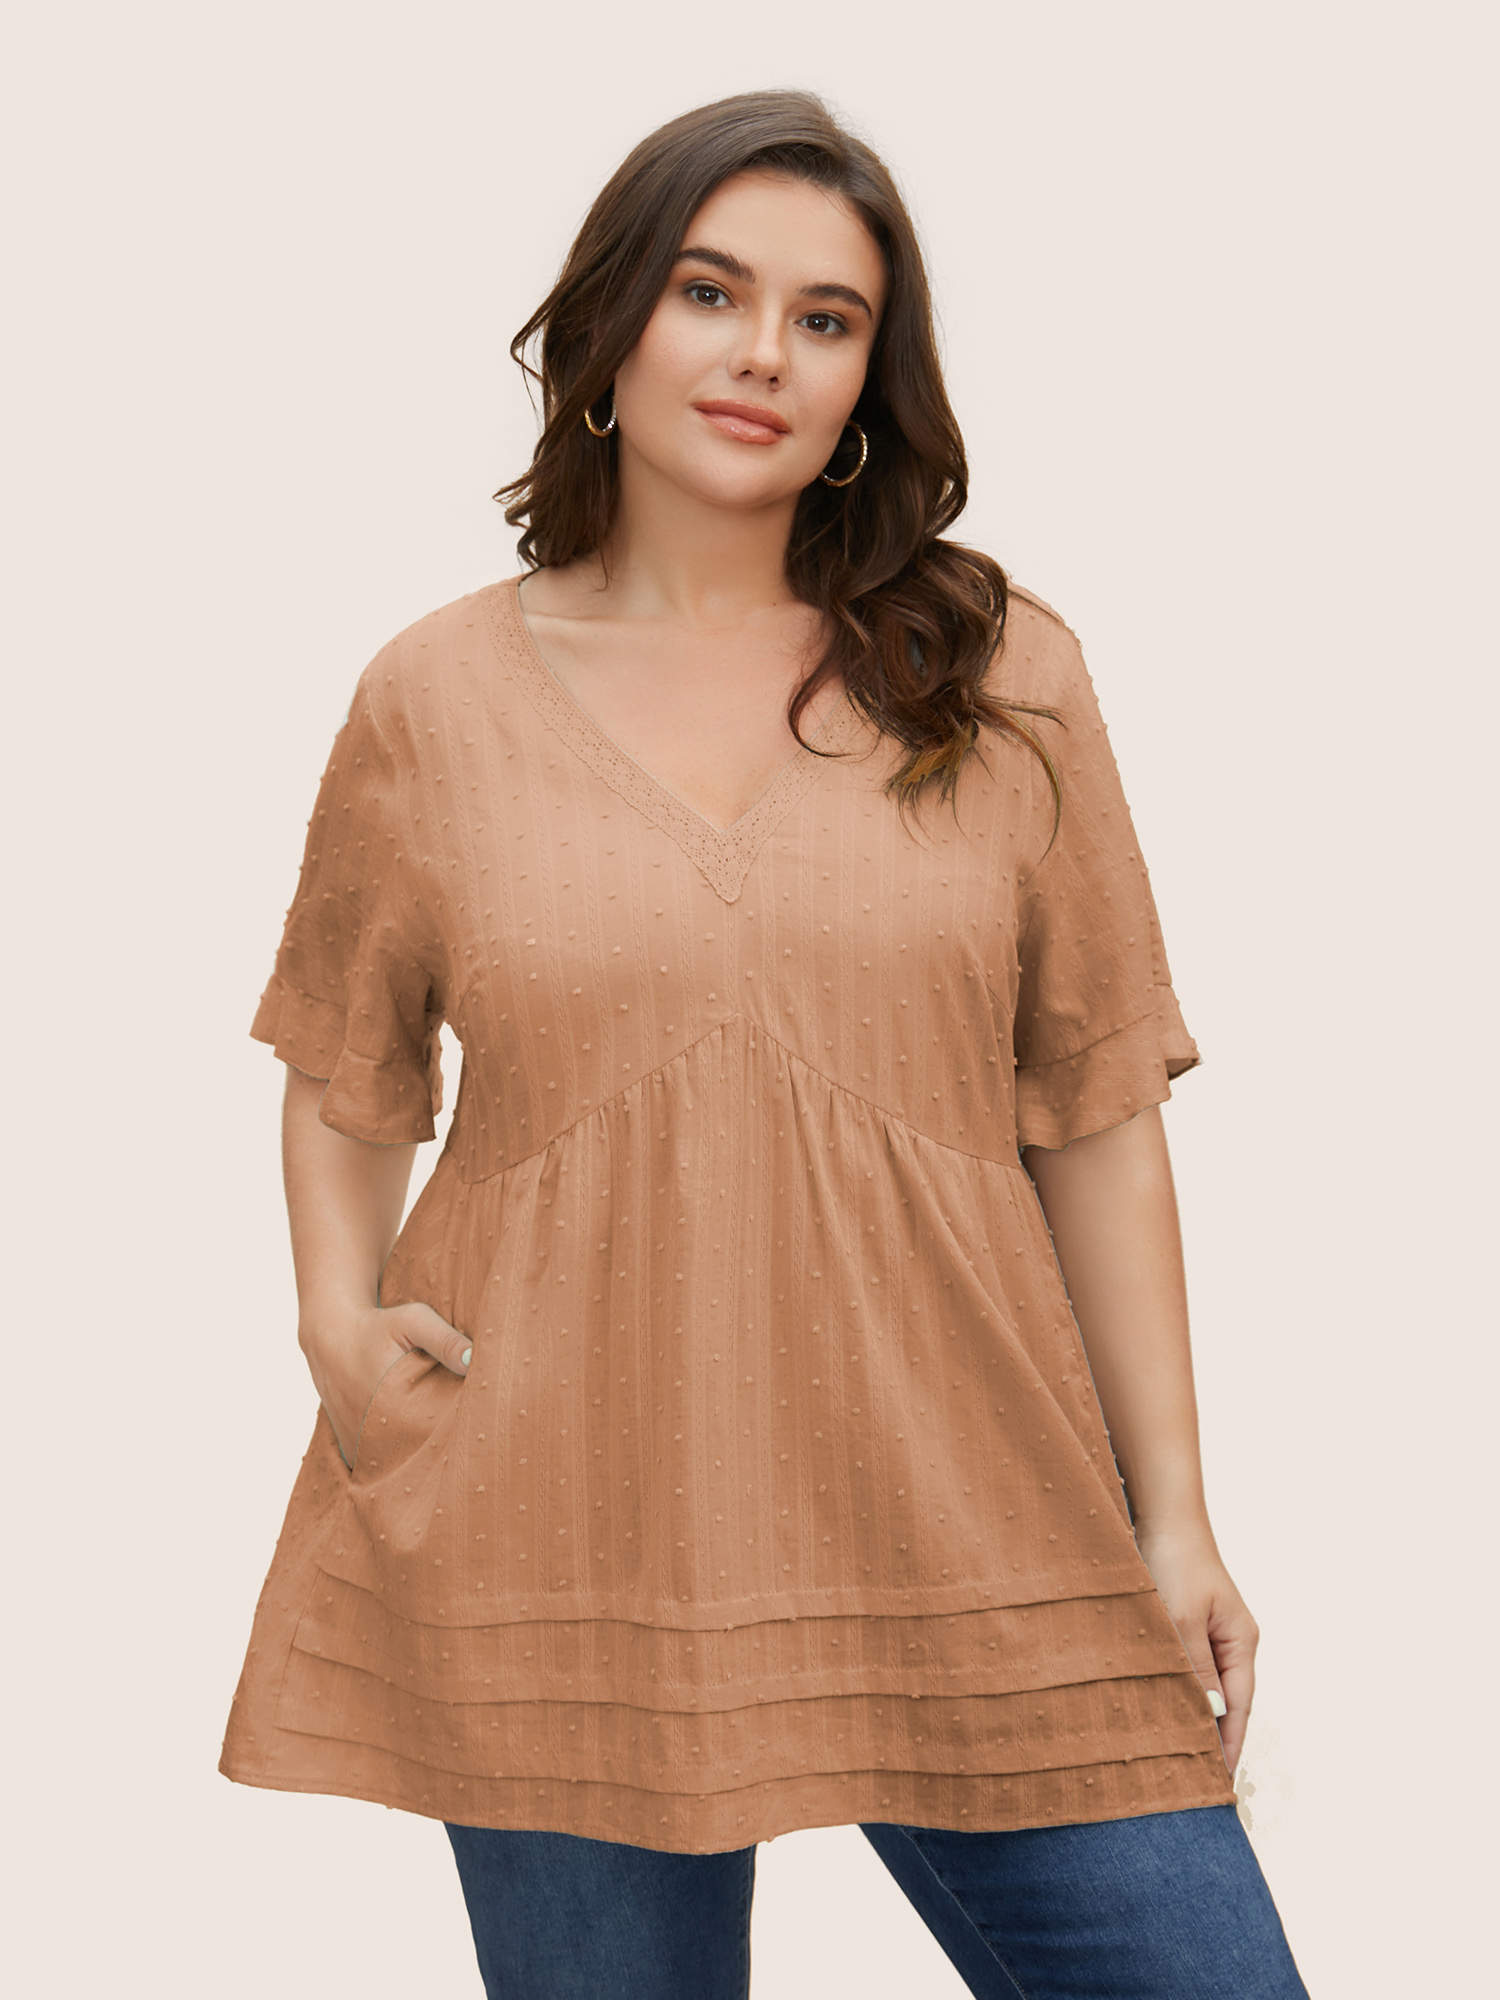 

Plus Size Yellowishbrown Textured Lace Panel Pleated Pocket Blouse Women Casual Short sleeve V-neck Everyday Blouses BloomChic